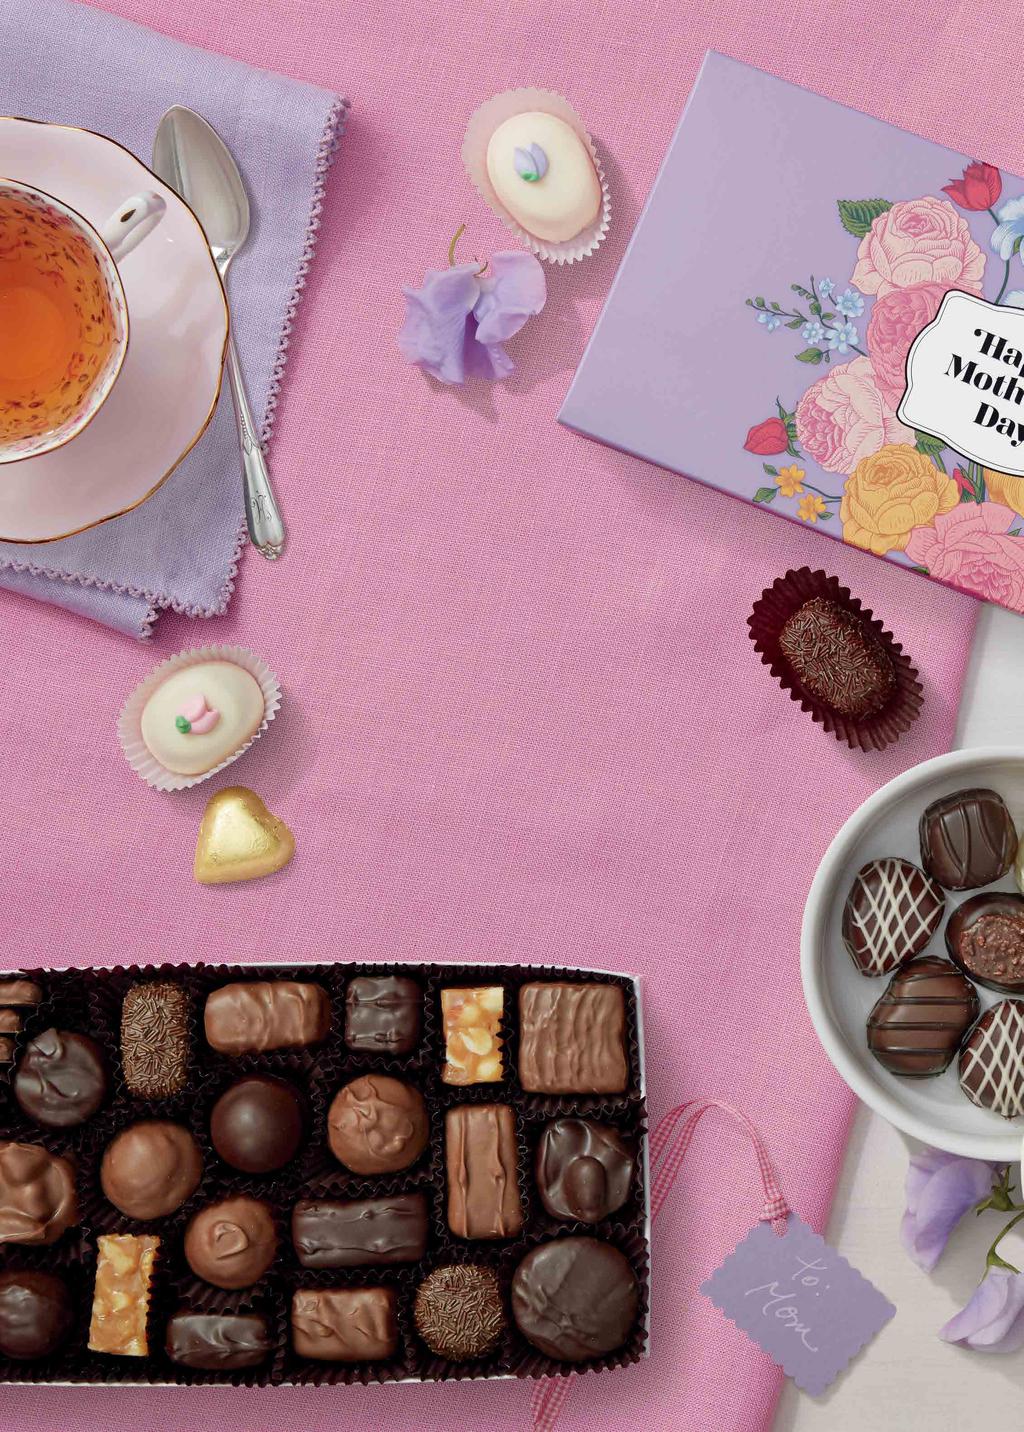 Dear friends, Spring is in the air, with so many reasons to celebrate and share a box of See s Candies.